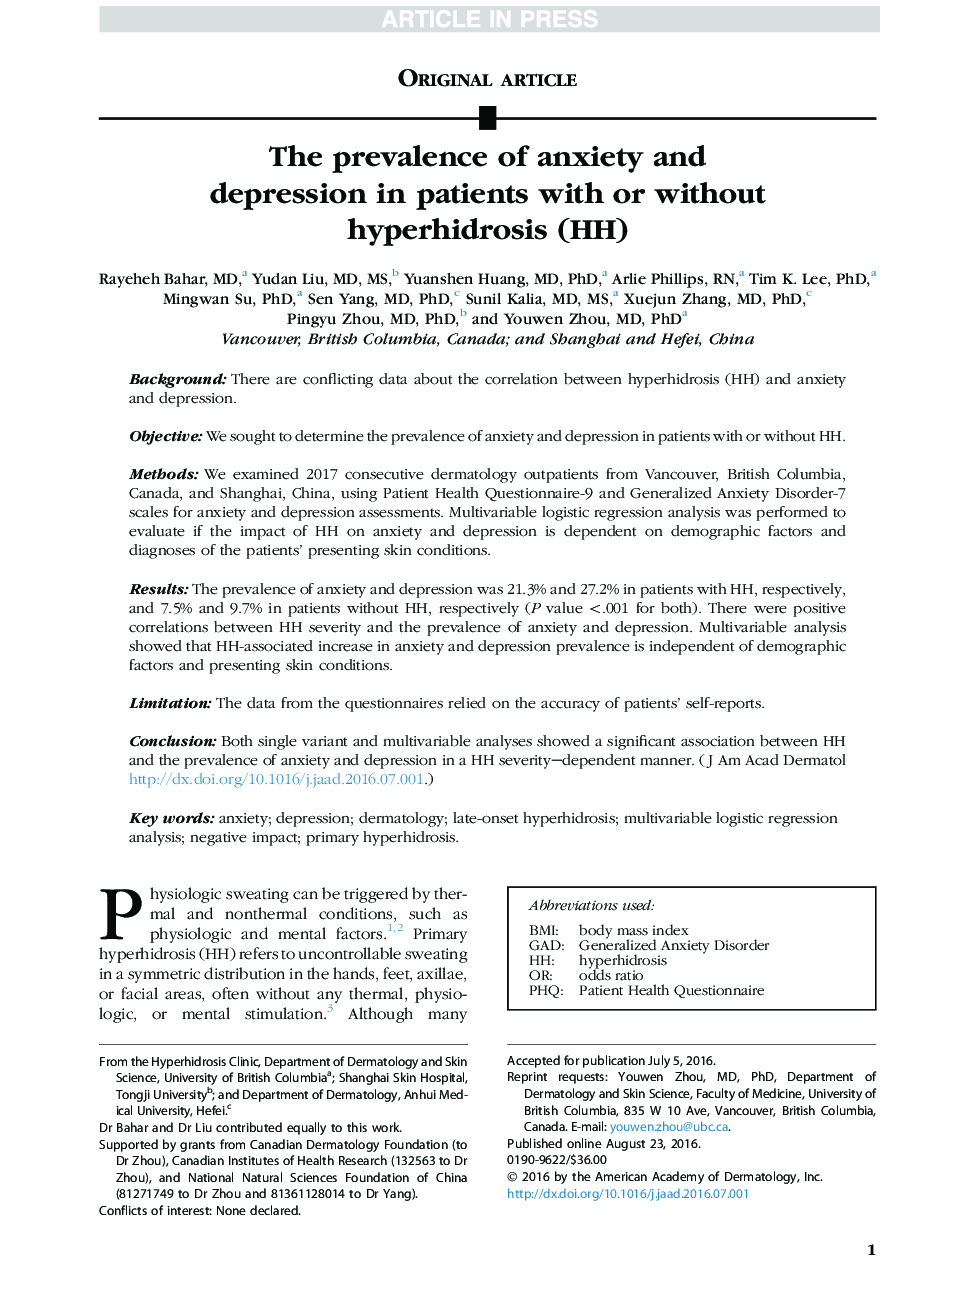 The prevalence of anxiety and depression in patients with or without hyperhidrosis (HH)